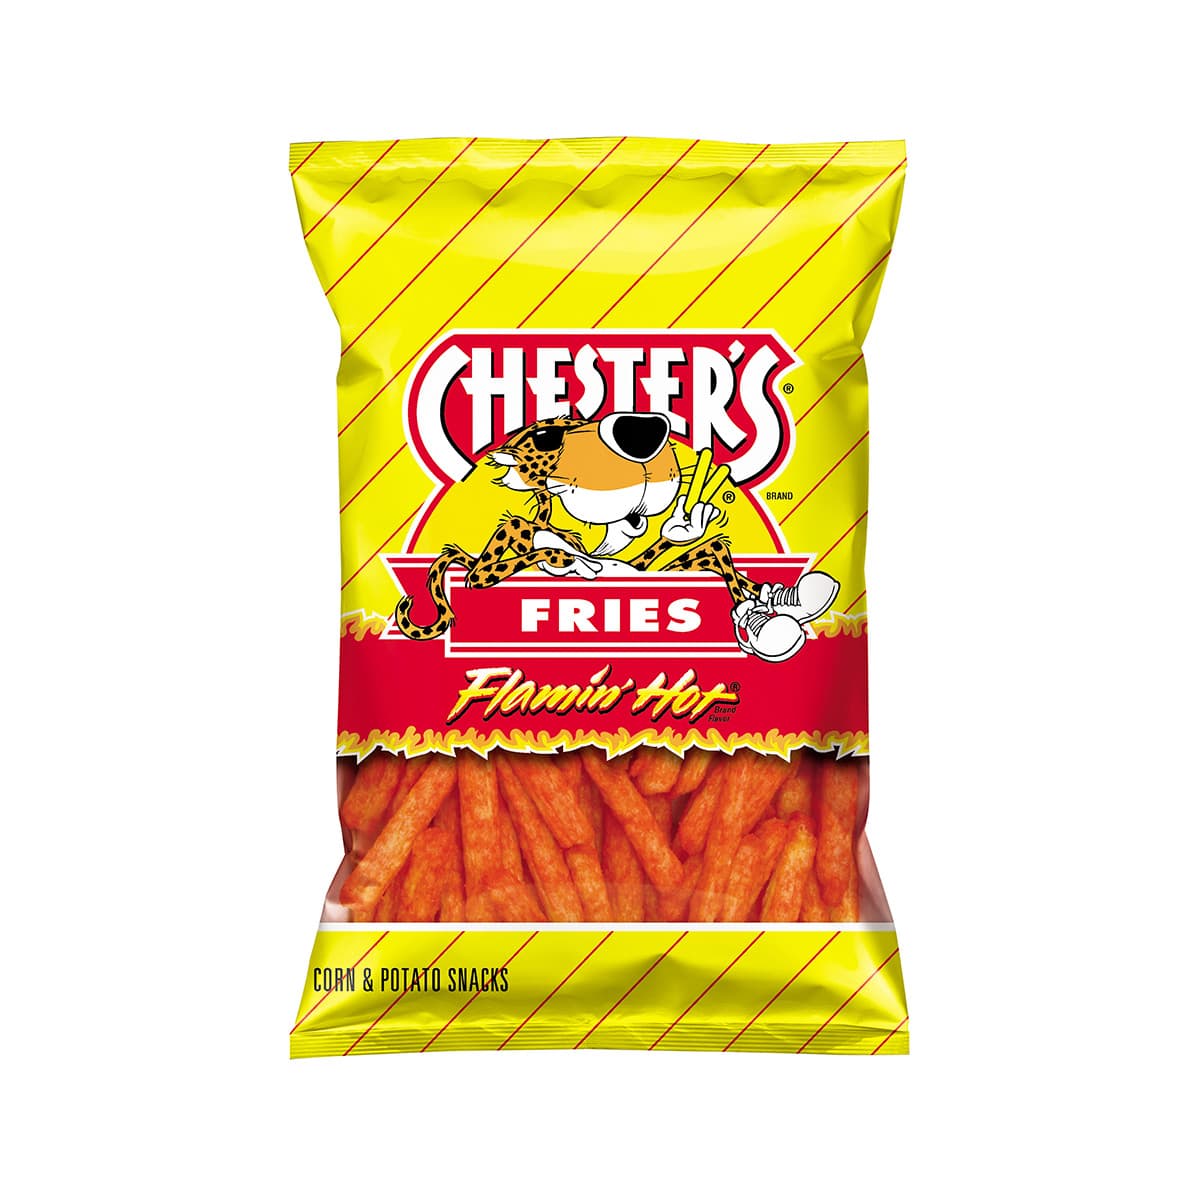 who made chesters hot fries